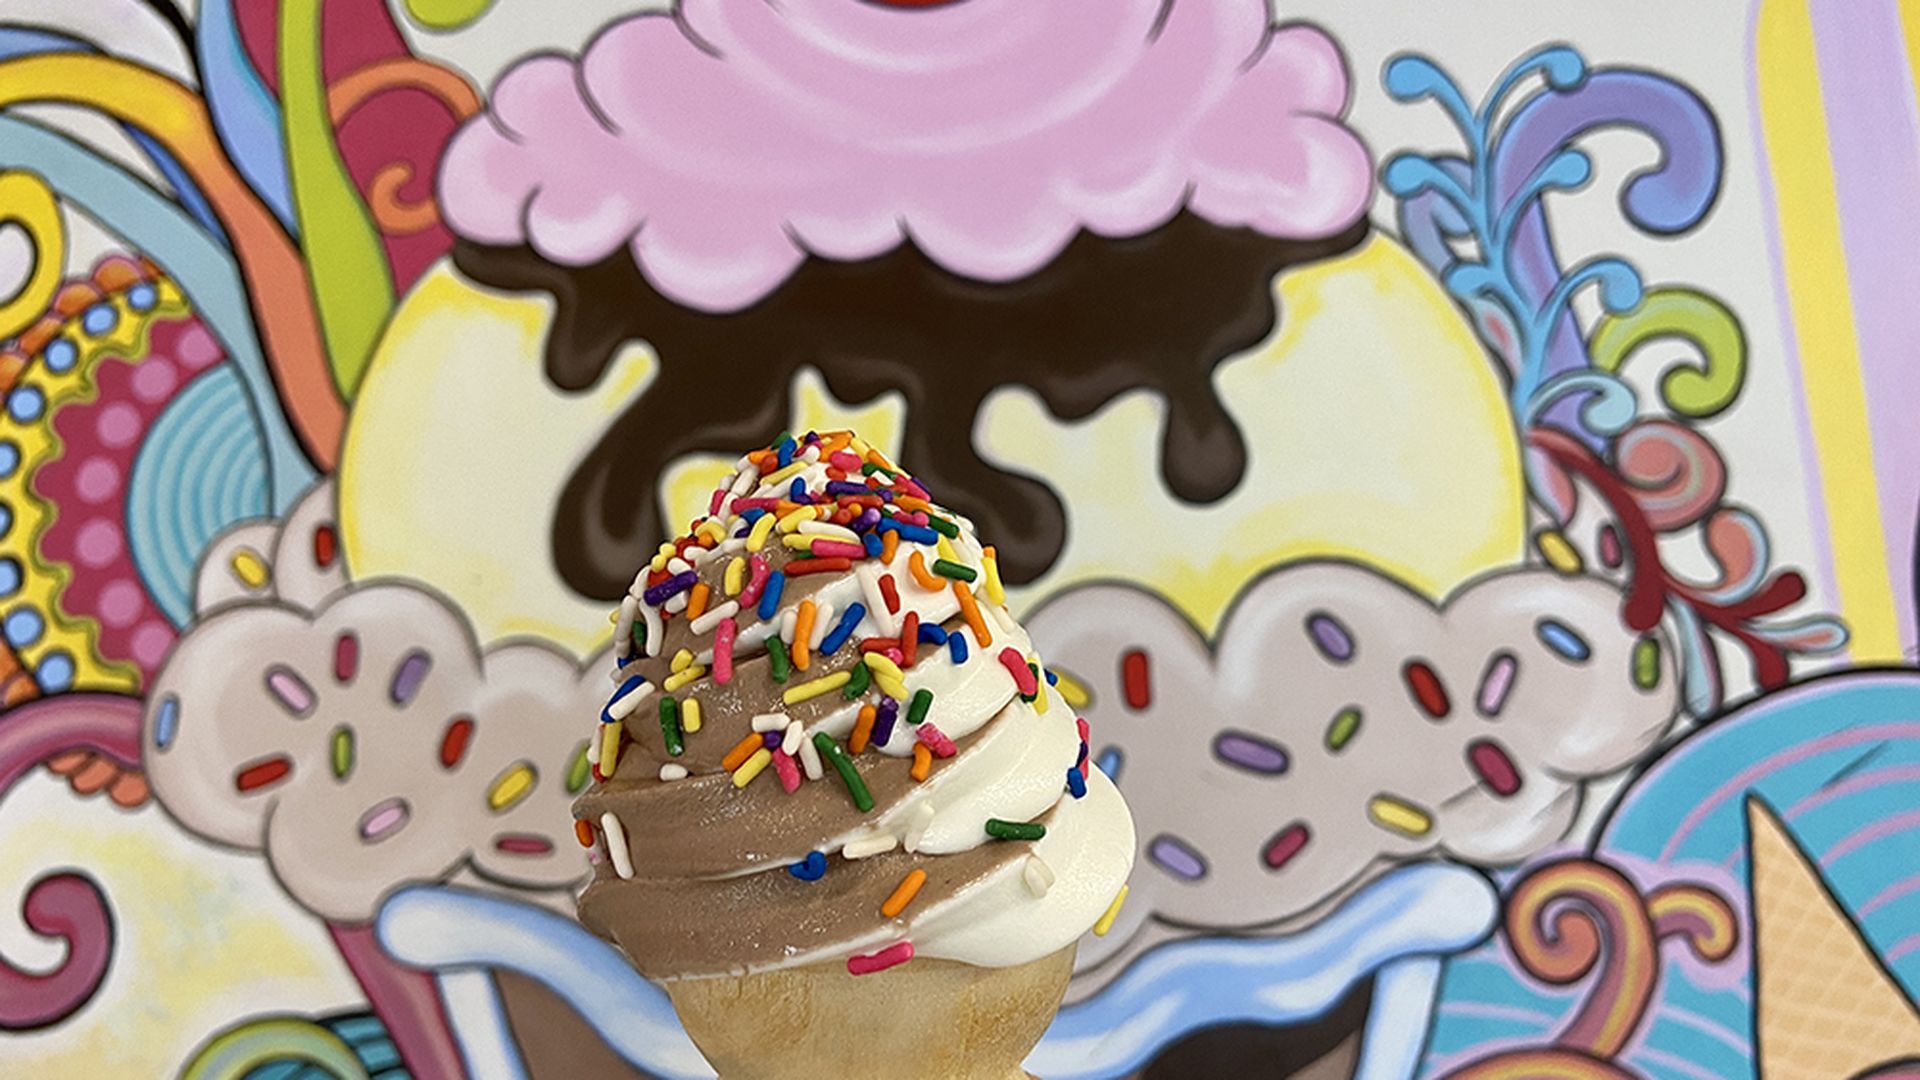 Soft-serve swirl in a cake cone with rainbow sprinkles at Two Scoops Creamery. Photo: Ashley Mahoney/Axios